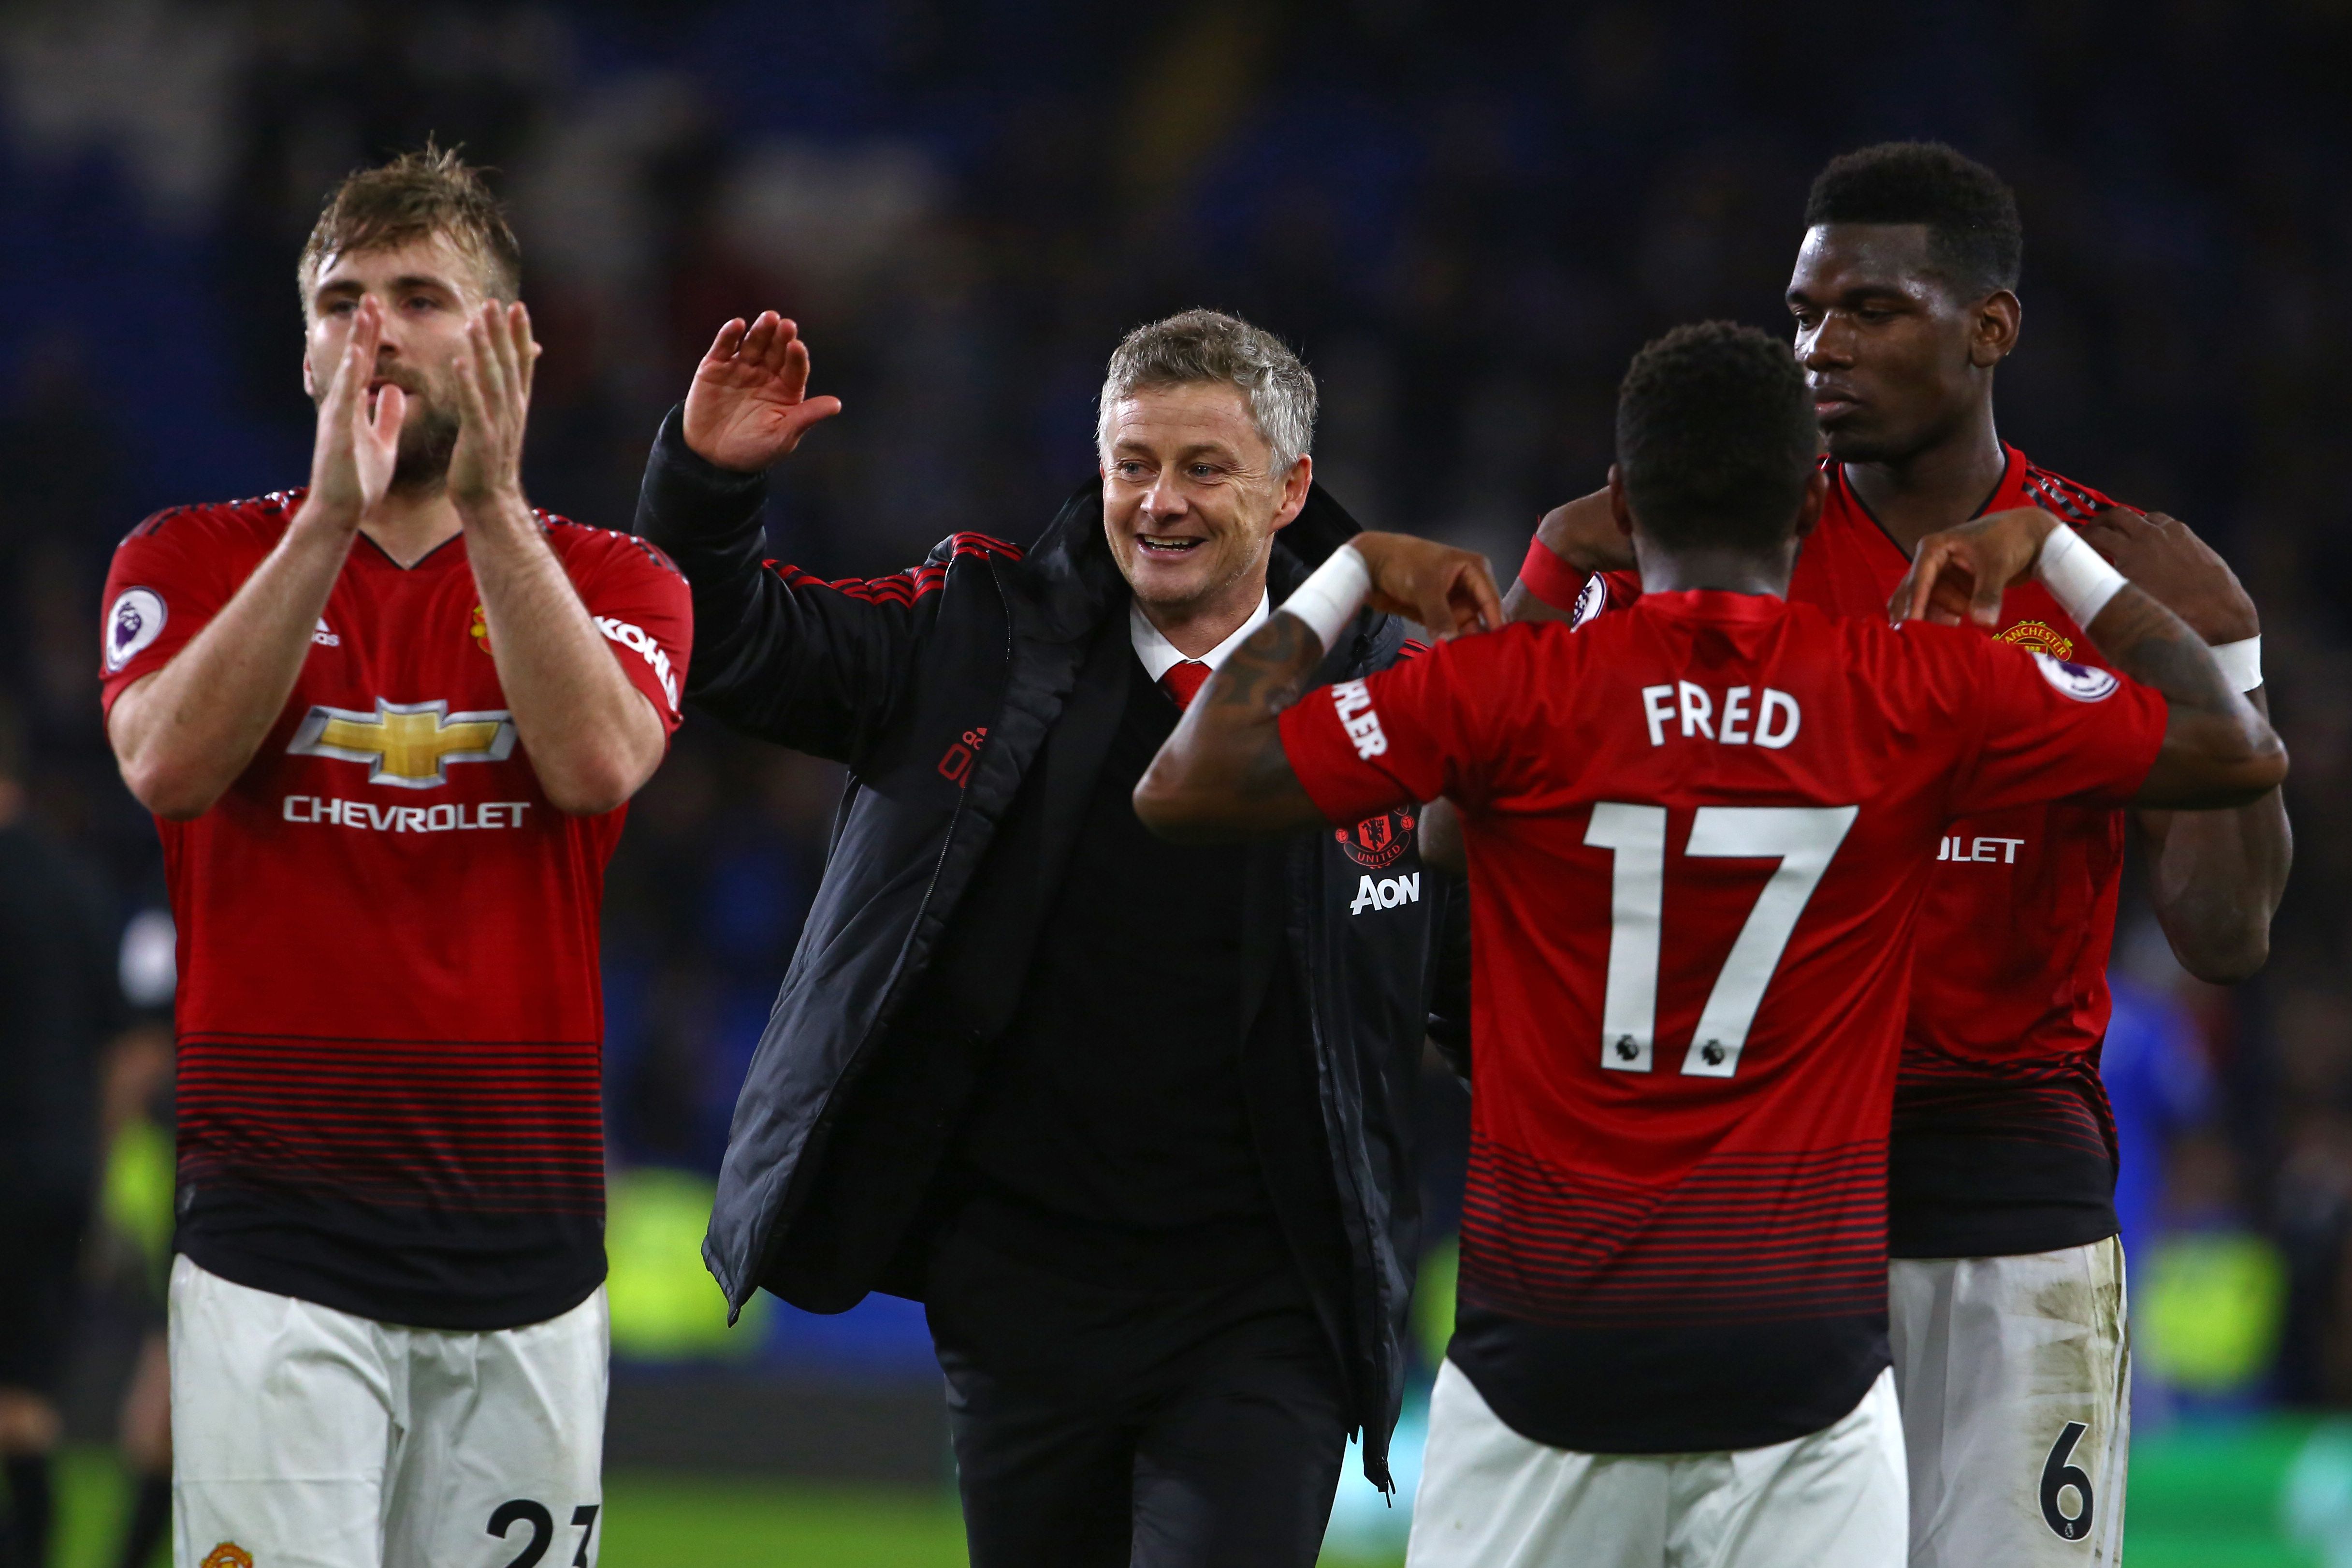 TOPSHOT - Manchester United's Norwegian caretaker manager Ole Gunnar Solskjaer (C) celebrates with his players on the pitch after the English Premier League football match between between Cardiff City and Manchester United at Cardiff City Stadium in Cardiff, south Wales on  December 22, 2018. - Manchester United won the game 5-1. (Photo by Geoff CADDICK / AFP) / RESTRICTED TO EDITORIAL USE. No use with unauthorized audio, video, data, fixture lists, club/league logos or 'live' services. Online in-match use limited to 120 images. An additional 40 images may be used in extra time. No video emulation. Social media in-match use limited to 120 images. An additional 40 images may be used in extra time. No use in betting publications, games or single club/league/player publications. /         (Photo credit should read GEOFF CADDICK/AFP/Getty Images)